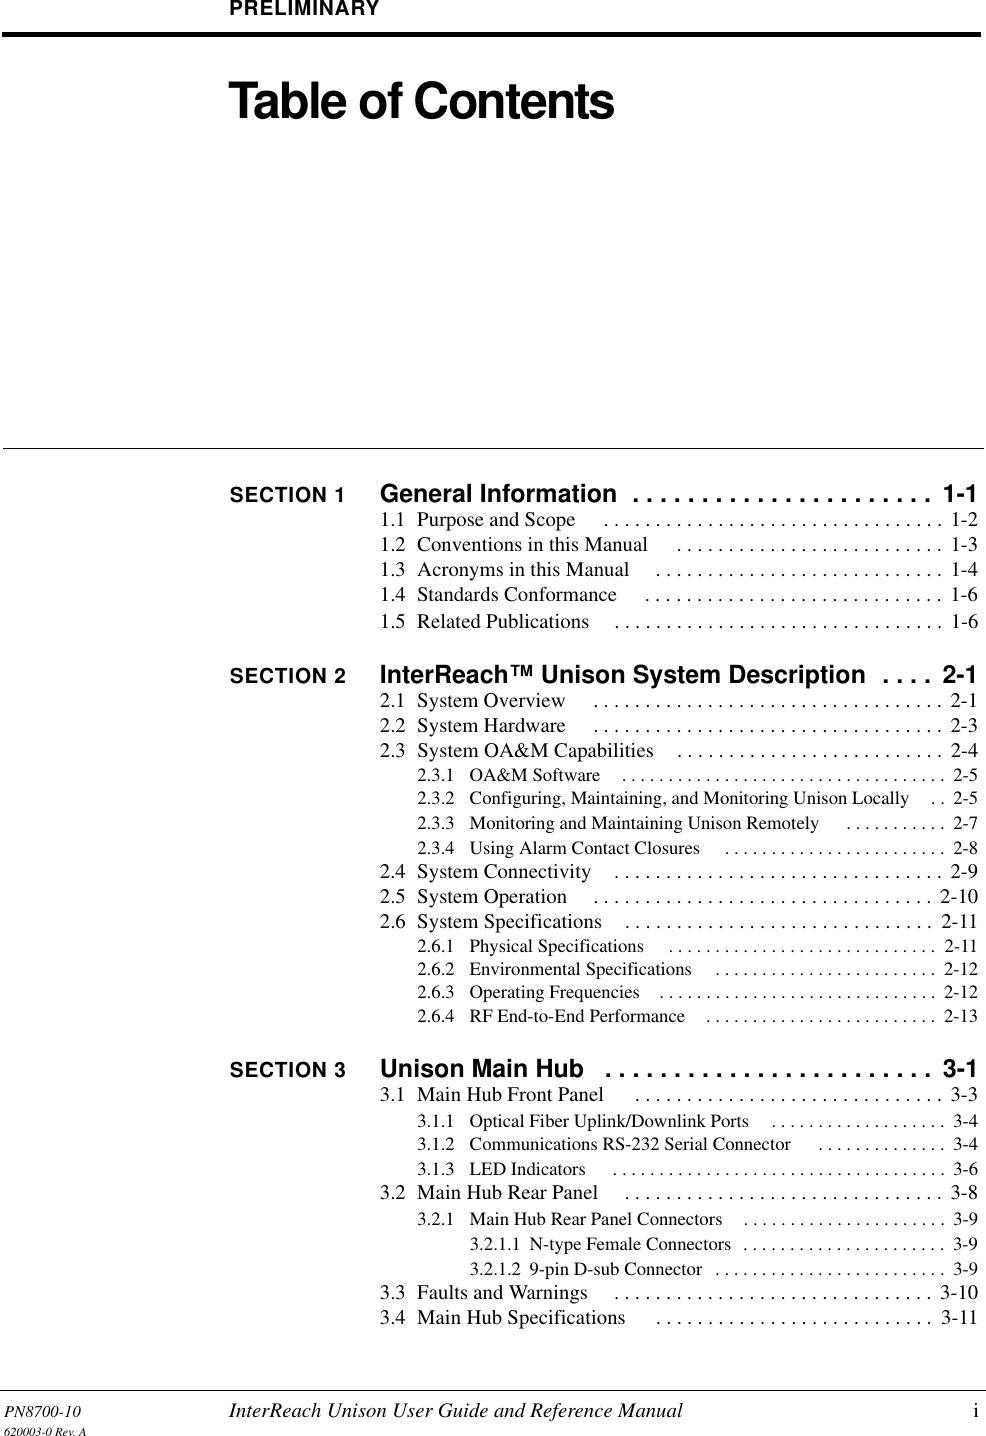 PN8700-10 InterReach Unison User Guide and Reference Manual i620003-0 Rev. APRELIMINARYTable of ContentsSECTION 1 General Information  . . . . . . . . . . . . . . . . . . . . . .  1-11.1  Purpose and Scope  . . . . . . . . . . . . . . . . . . . . . . . . . . . . . . . . . 1-21.2  Conventions in this Manual  . . . . . . . . . . . . . . . . . . . . . . . . . . 1-31.3  Acronyms in this Manual  . . . . . . . . . . . . . . . . . . . . . . . . . . . .  1-41.4  Standards Conformance  . . . . . . . . . . . . . . . . . . . . . . . . . . . . . 1-61.5  Related Publications . . . . . . . . . . . . . . . . . . . . . . . . . . . . . . . .  1-6SECTION 2 InterReach™ Unison System Description  . . . .  2-12.1  System Overview  . . . . . . . . . . . . . . . . . . . . . . . . . . . . . . . . . . 2-12.2  System Hardware  . . . . . . . . . . . . . . . . . . . . . . . . . . . . . . . . . . 2-32.3  System OA&amp;M Capabilities . . . . . . . . . . . . . . . . . . . . . . . . . .  2-42.3.1  OA&amp;M Software . . . . . . . . . . . . . . . . . . . . . . . . . . . . . . . . . . .  2-52.3.2  Configuring, Maintaining, and Monitoring Unison Locally . .  2-52.3.3  Monitoring and Maintaining Unison Remotely  . . . . . . . . . . .  2-72.3.4  Using Alarm Contact Closures  . . . . . . . . . . . . . . . . . . . . . . . .  2-82.4  System Connectivity . . . . . . . . . . . . . . . . . . . . . . . . . . . . . . . . 2-92.5  System Operation  . . . . . . . . . . . . . . . . . . . . . . . . . . . . . . . . . 2-102.6  System Specifications . . . . . . . . . . . . . . . . . . . . . . . . . . . . . .  2-112.6.1  Physical Specifications  . . . . . . . . . . . . . . . . . . . . . . . . . . . . .  2-112.6.2  Environmental Specifications  . . . . . . . . . . . . . . . . . . . . . . . .  2-122.6.3  Operating Frequencies . . . . . . . . . . . . . . . . . . . . . . . . . . . . . .  2-122.6.4  RF End-to-End Performance . . . . . . . . . . . . . . . . . . . . . . . . .  2-13SECTION 3 Unison Main Hub   . . . . . . . . . . . . . . . . . . . . . . . .  3-13.1  Main Hub Front Panel  . . . . . . . . . . . . . . . . . . . . . . . . . . . . . .  3-33.1.1  Optical Fiber Uplink/Downlink Ports . . . . . . . . . . . . . . . . . . .  3-43.1.2  Communications RS-232 Serial Connector  . . . . . . . . . . . . . .  3-43.1.3  LED Indicators  . . . . . . . . . . . . . . . . . . . . . . . . . . . . . . . . . . . .  3-63.2  Main Hub Rear Panel  . . . . . . . . . . . . . . . . . . . . . . . . . . . . . . . 3-83.2.1  Main Hub Rear Panel Connectors . . . . . . . . . . . . . . . . . . . . . .  3-93.2.1.1  N-type Female Connectors  . . . . . . . . . . . . . . . . . . . . . .  3-93.2.1.2  9-pin D-sub Connector  . . . . . . . . . . . . . . . . . . . . . . . . .  3-93.3  Faults and Warnings  . . . . . . . . . . . . . . . . . . . . . . . . . . . . . . . 3-103.4  Main Hub Specifications  . . . . . . . . . . . . . . . . . . . . . . . . . . .  3-11